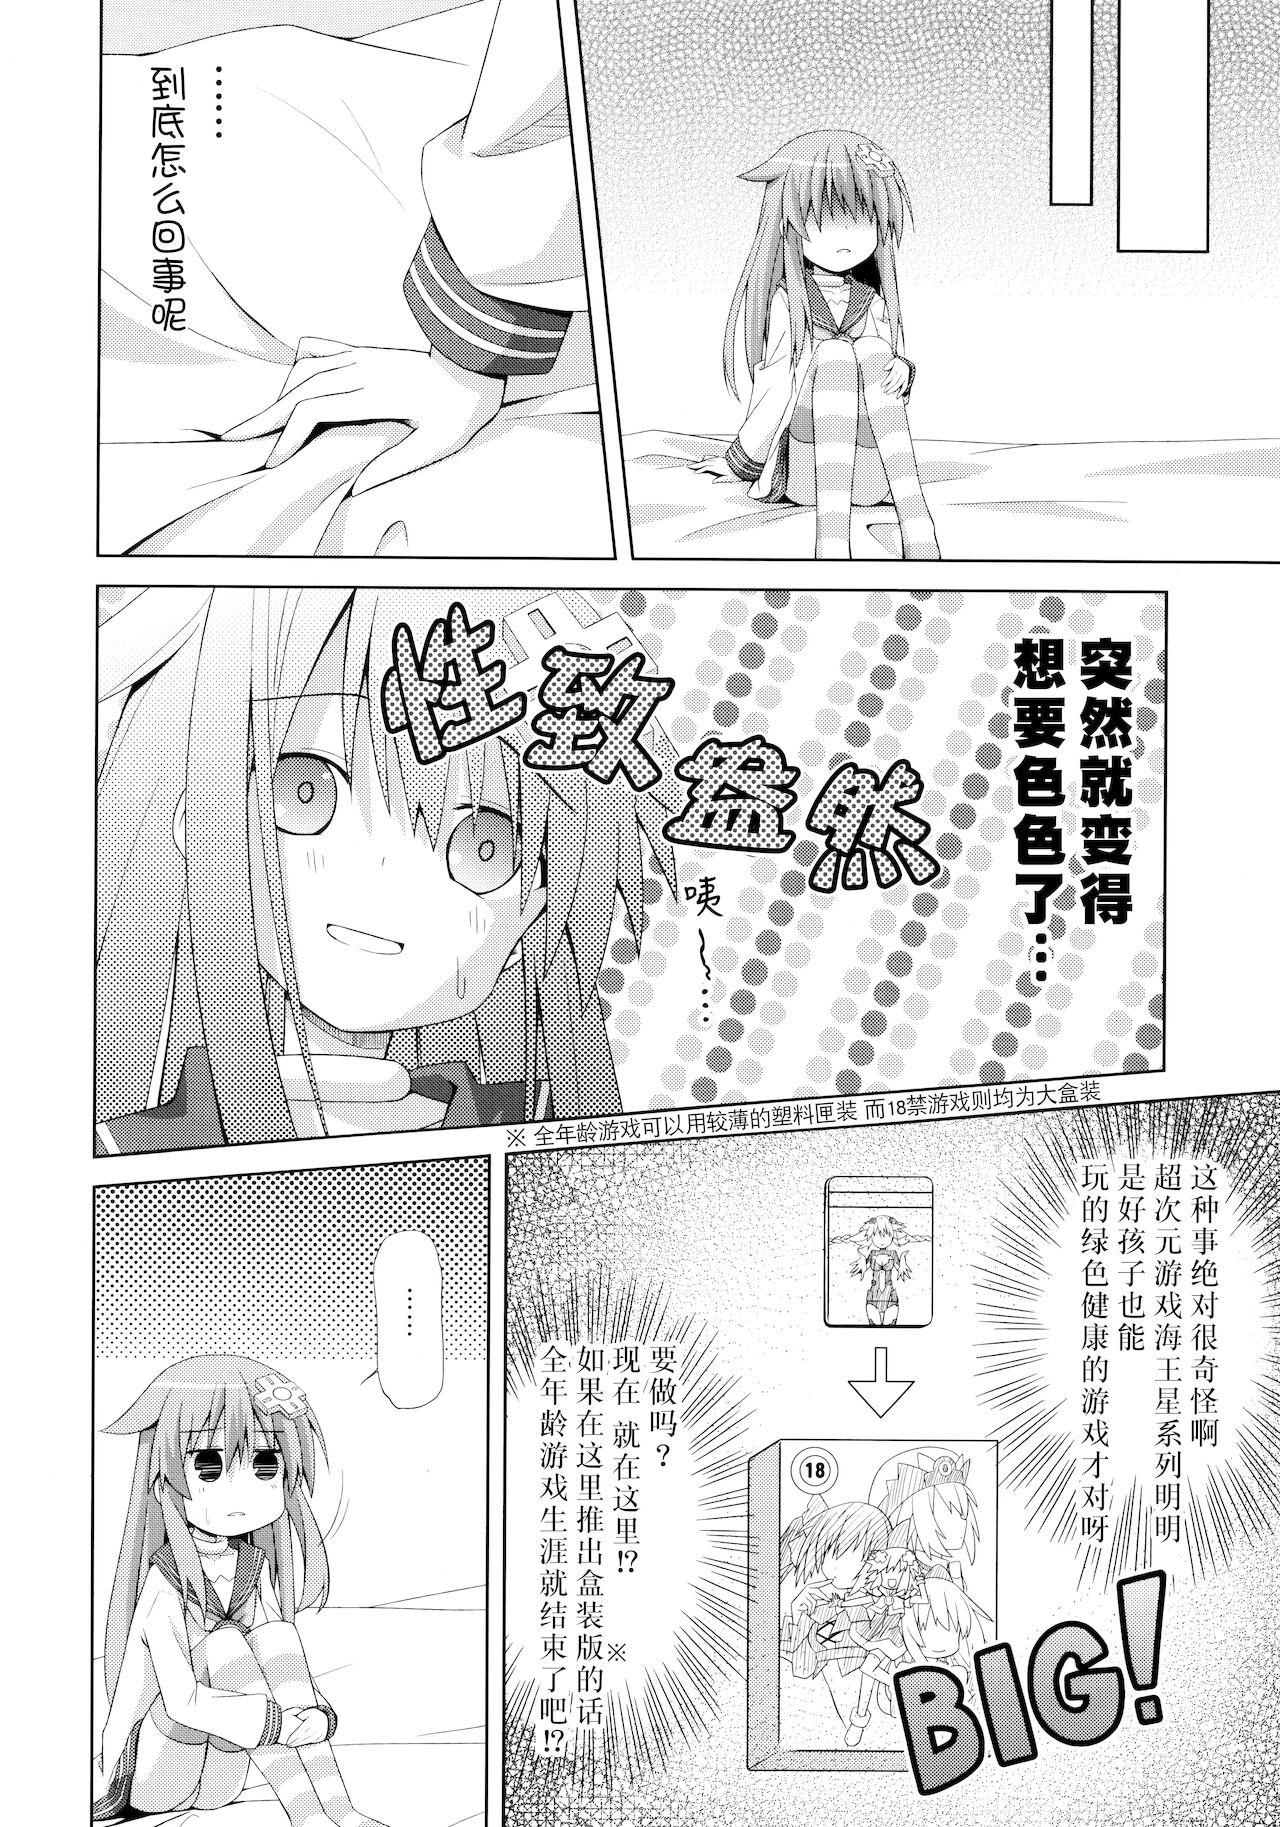 A certain Nepgear was harmed in the making of this doujinshi 6